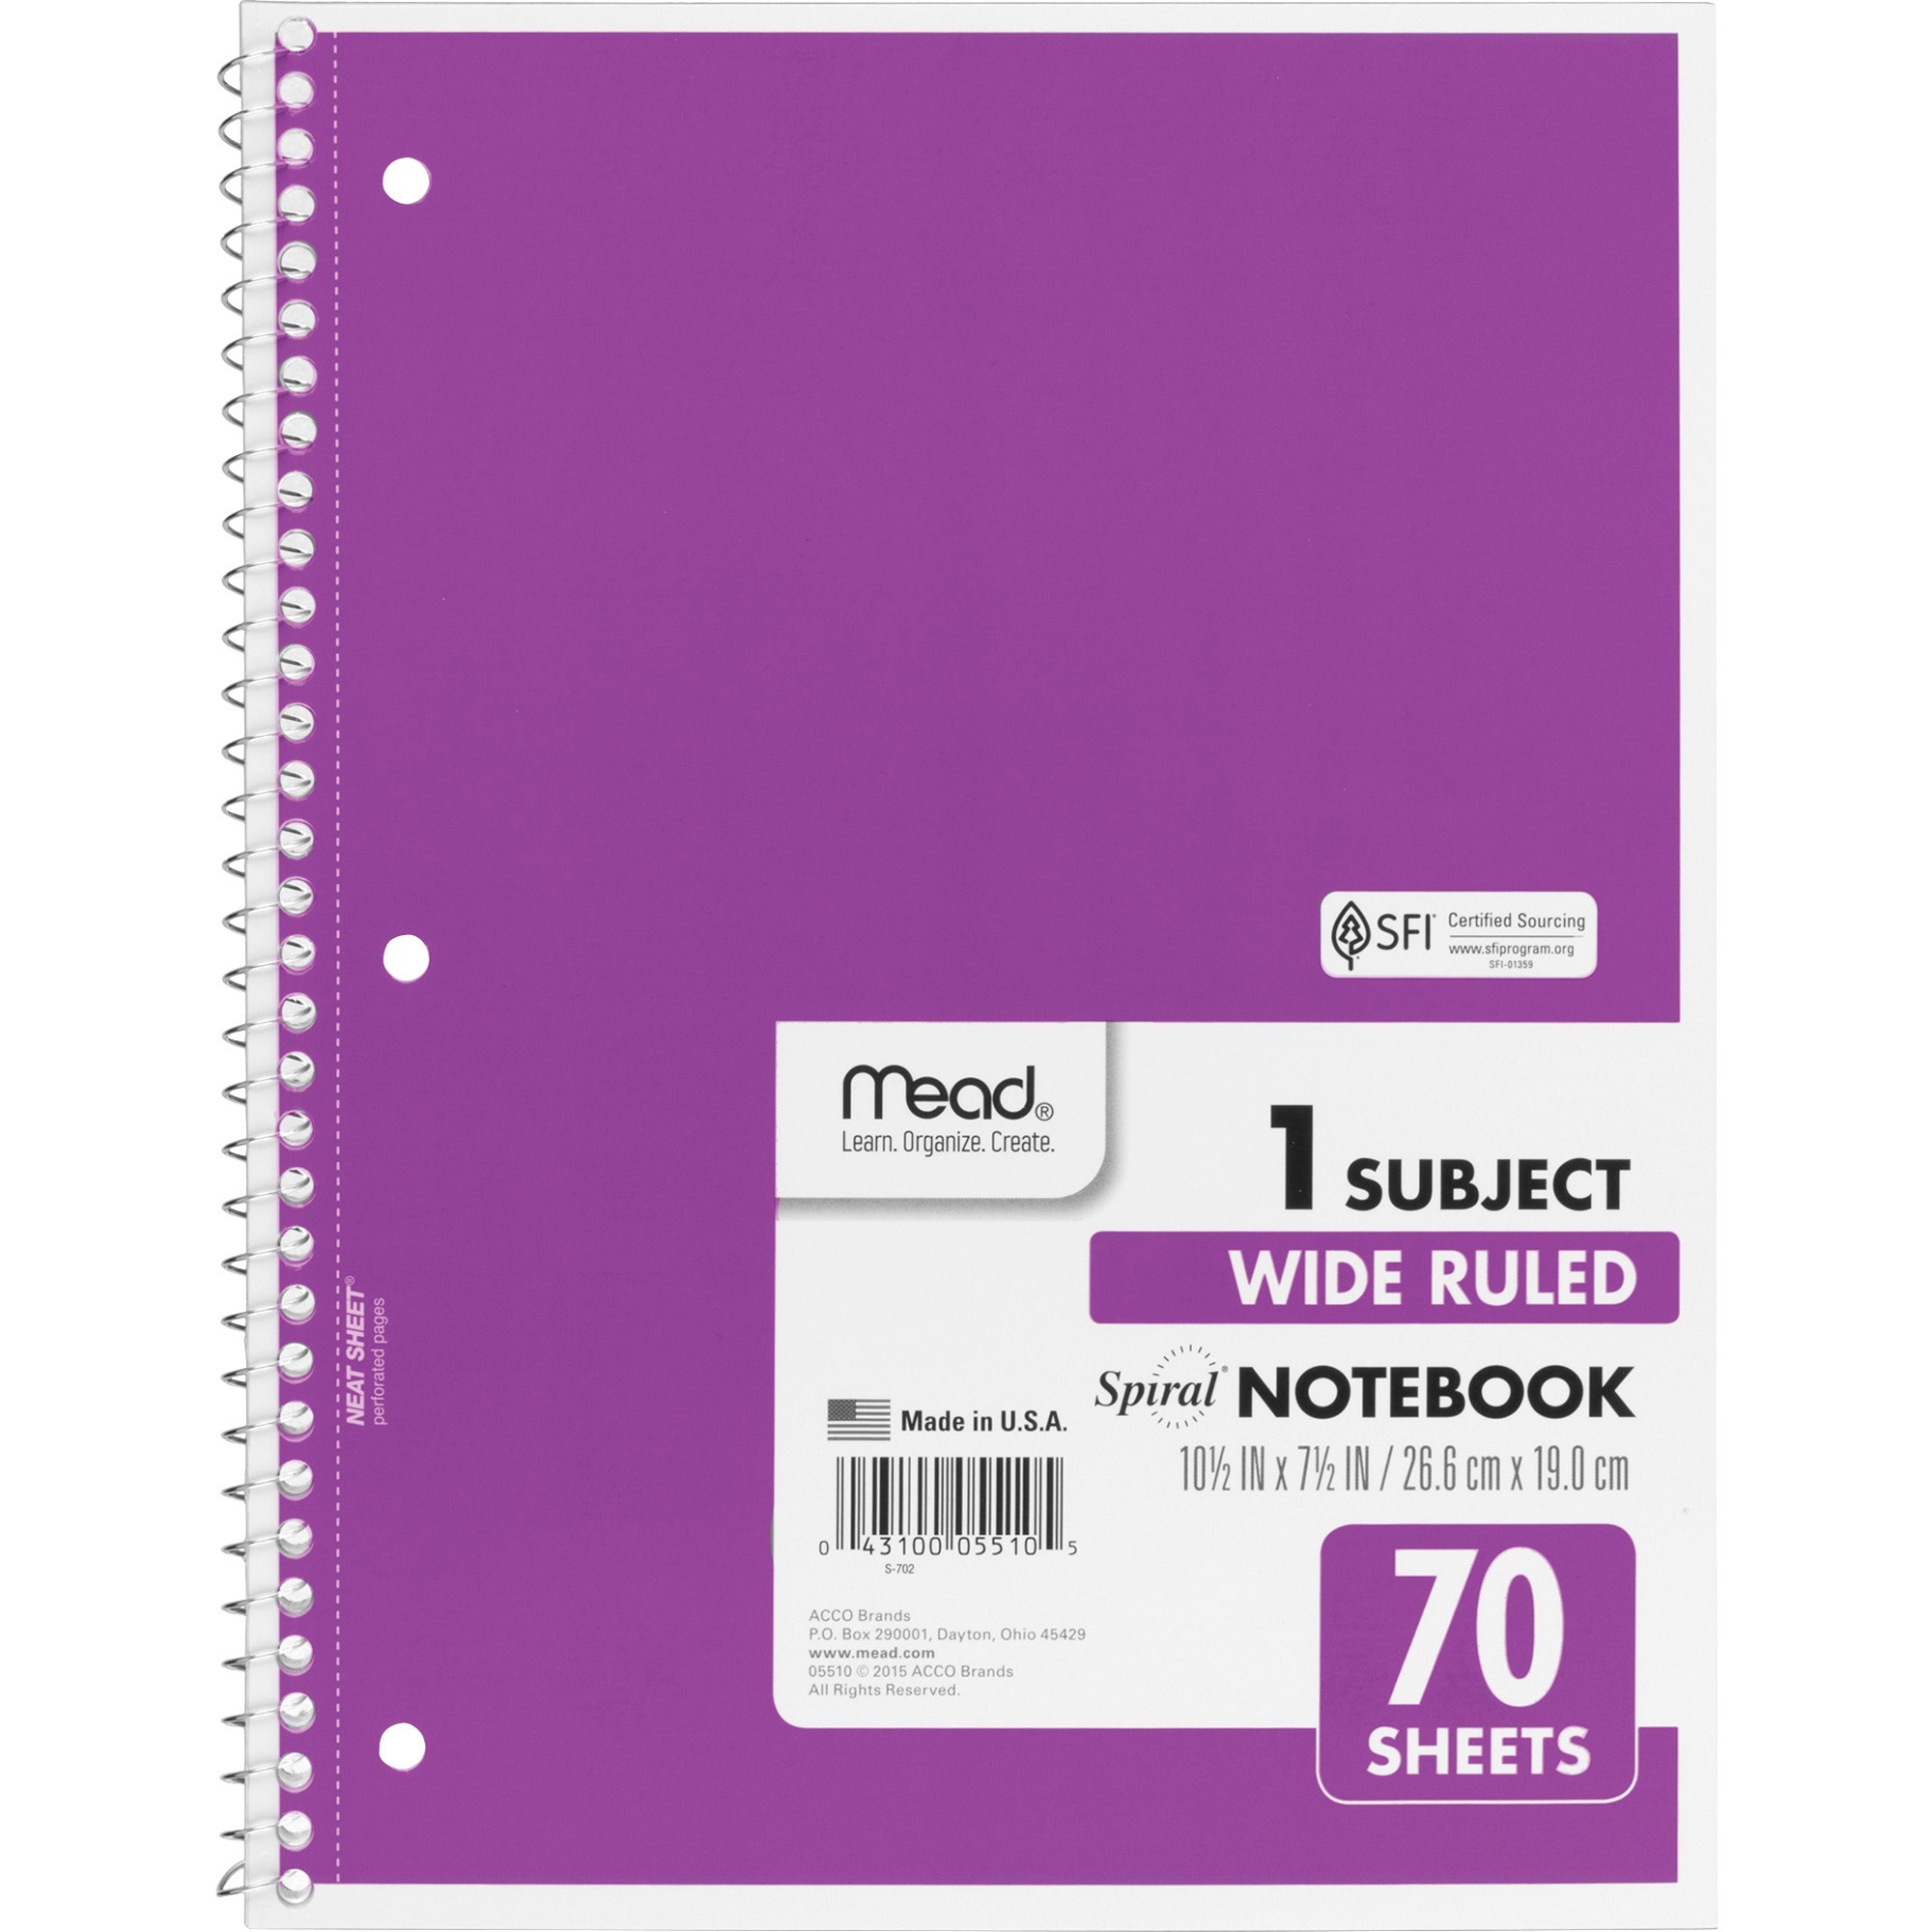 DDI 941120  1 Subject Wide Ruled Spiral Notebook -  70 Sheets  (assorted Color) -  Mead, MEA05510